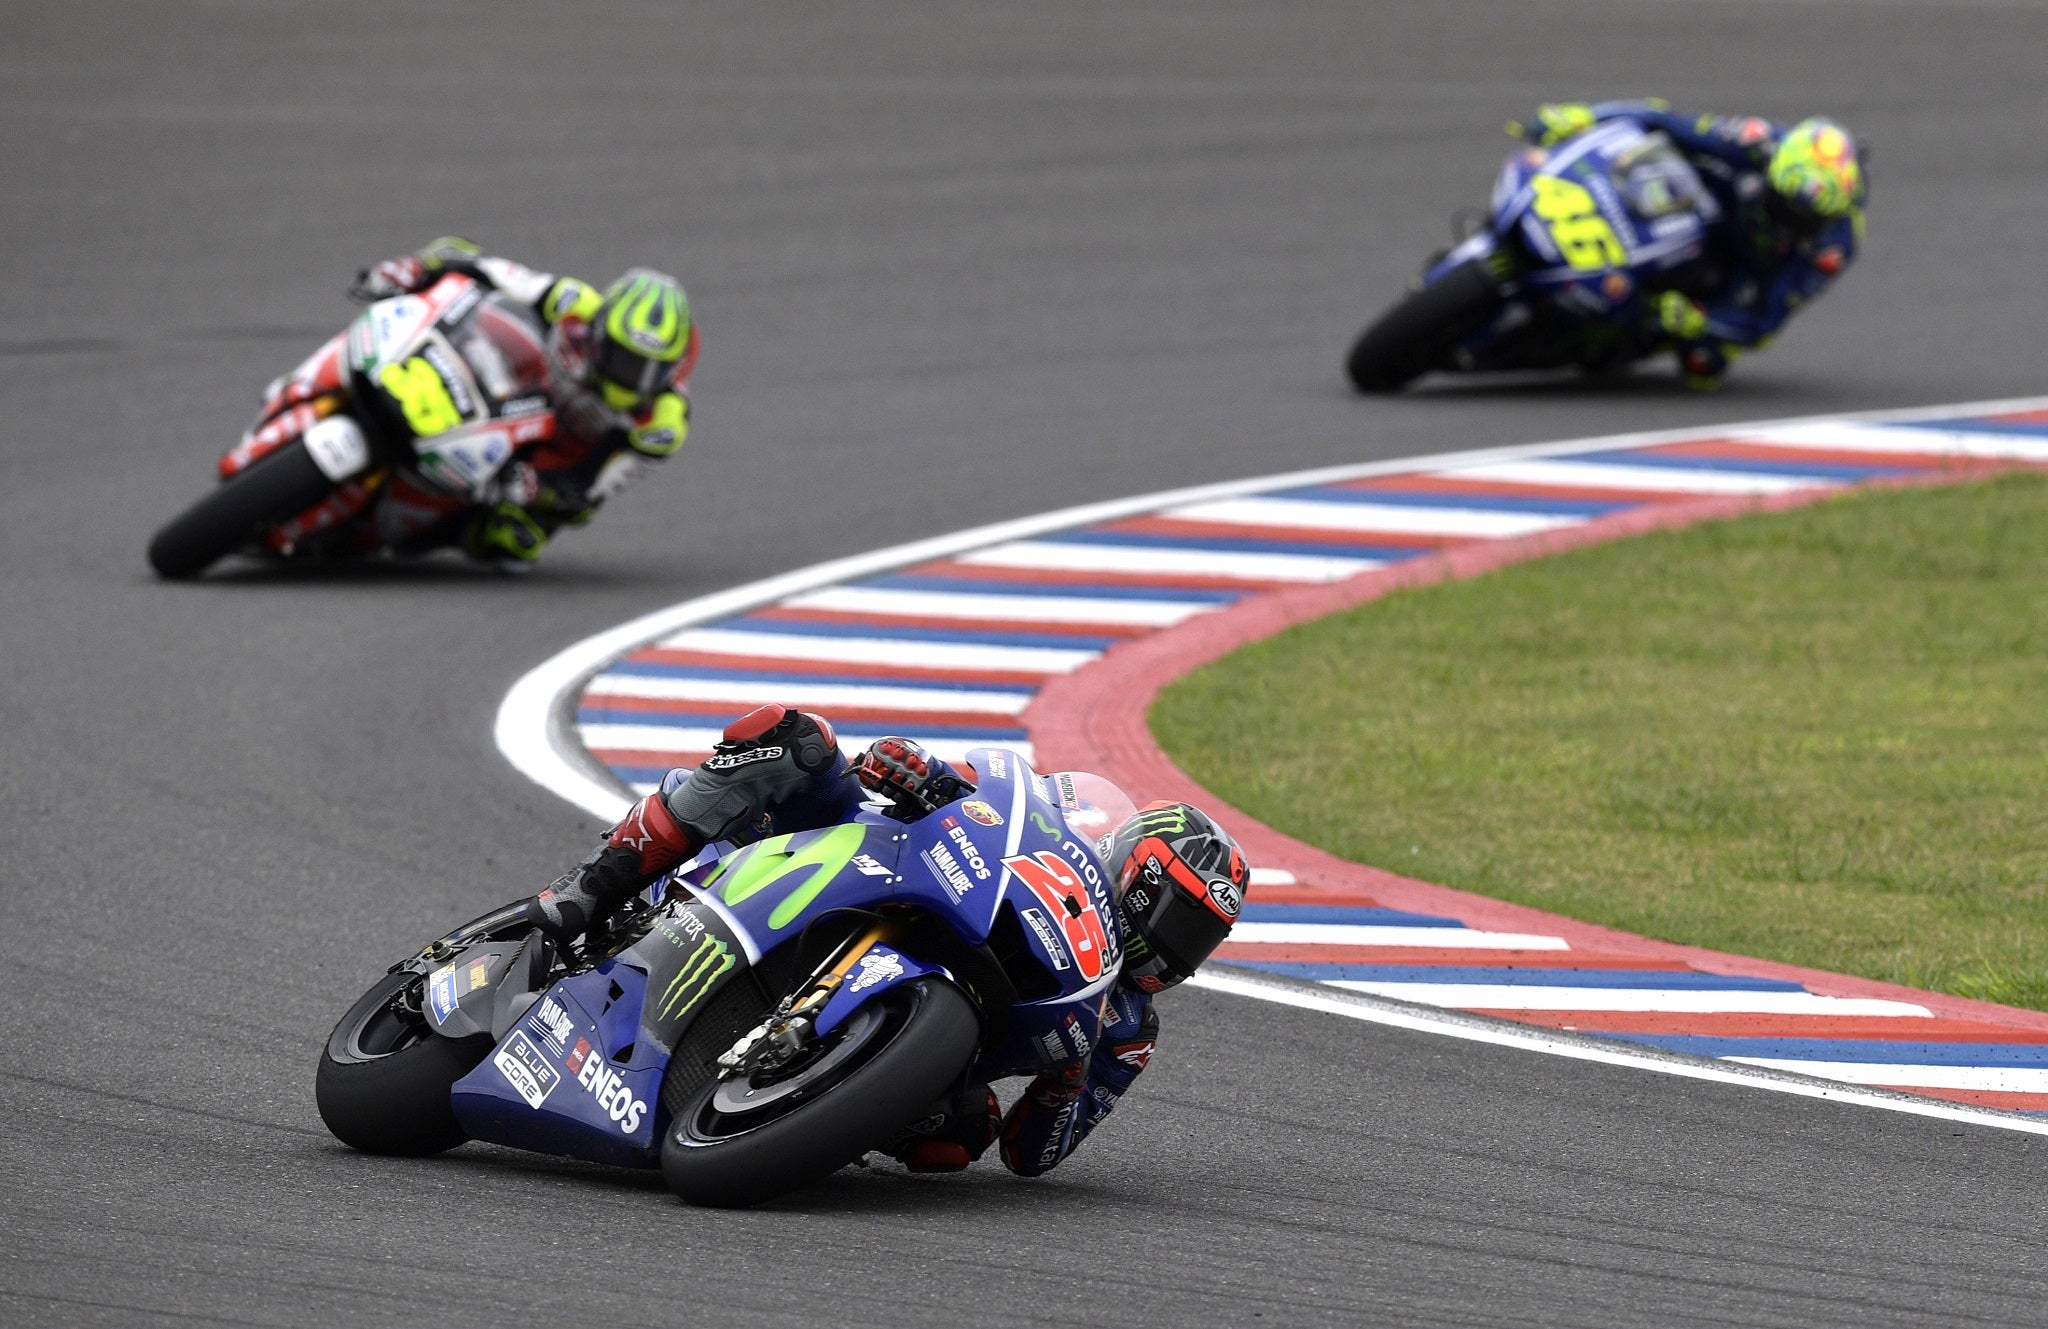 Vinales led Crutchlow until eight laps from home when Rossi made his move